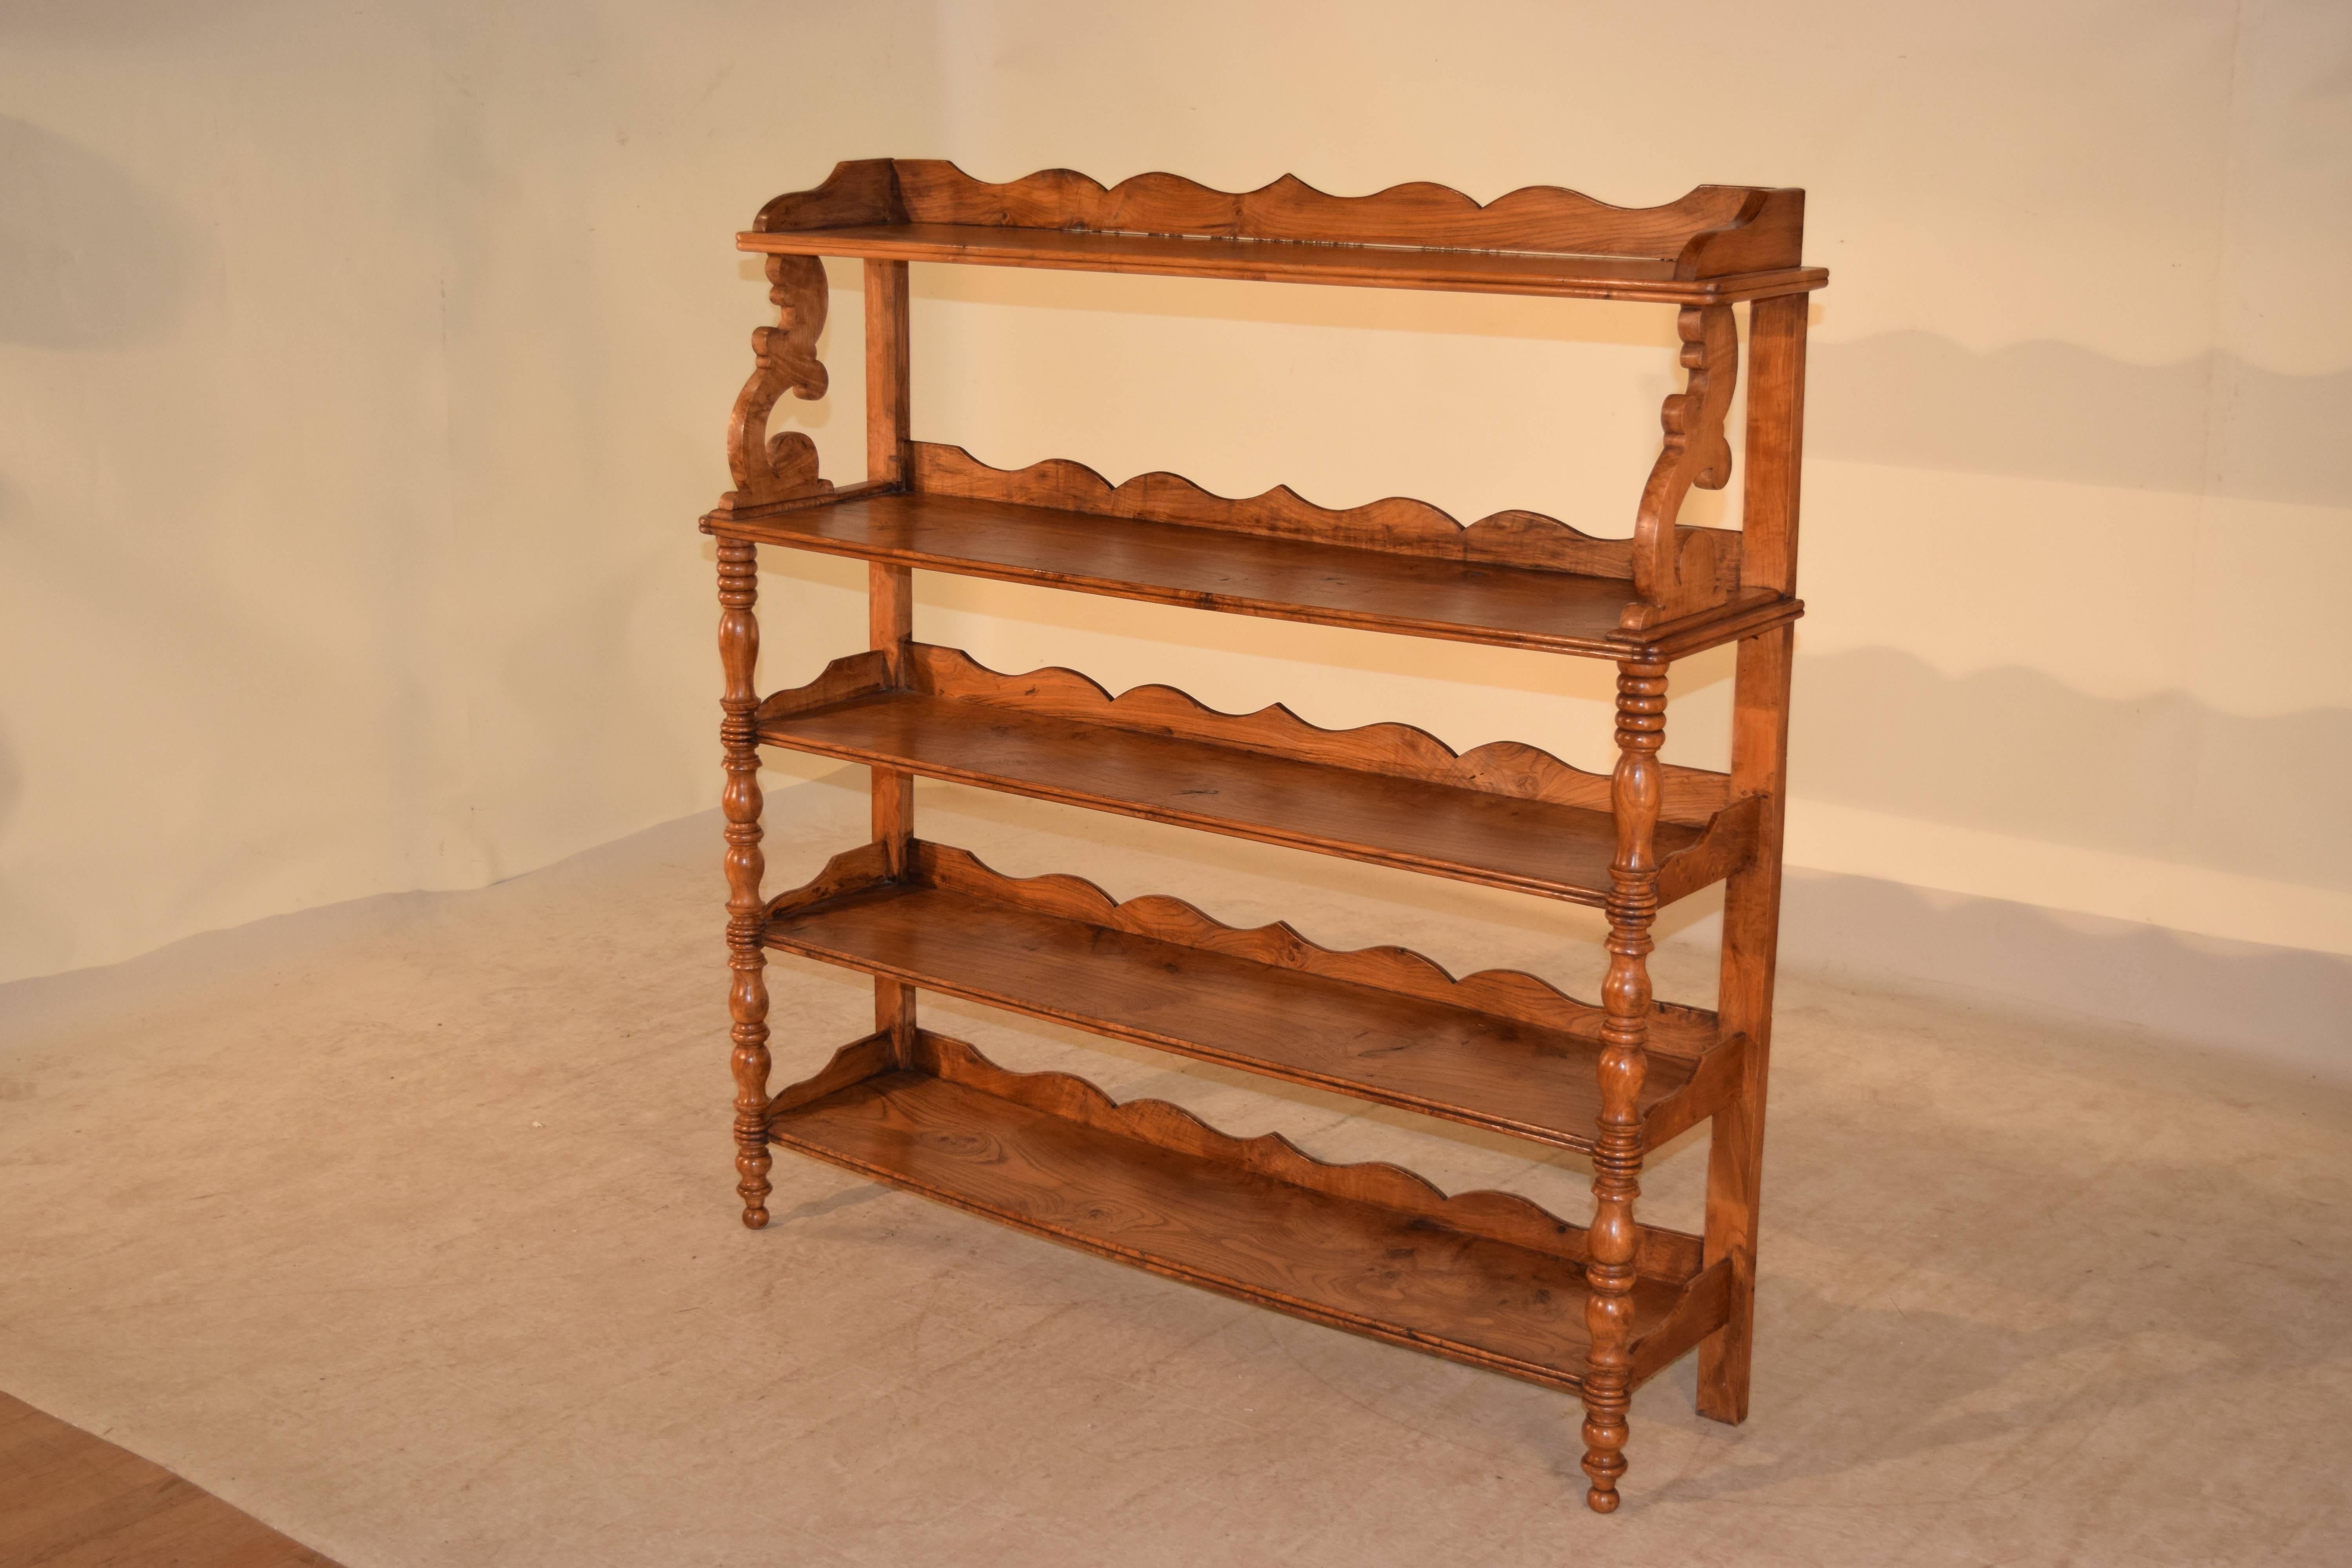 19th century English elm shelf with five shelves with lovely hand scalloped galleries and hand-carved and turned shelf supports. Raised on hand turned legs in the front and simple back legs for easy placement against a wall. The graining is